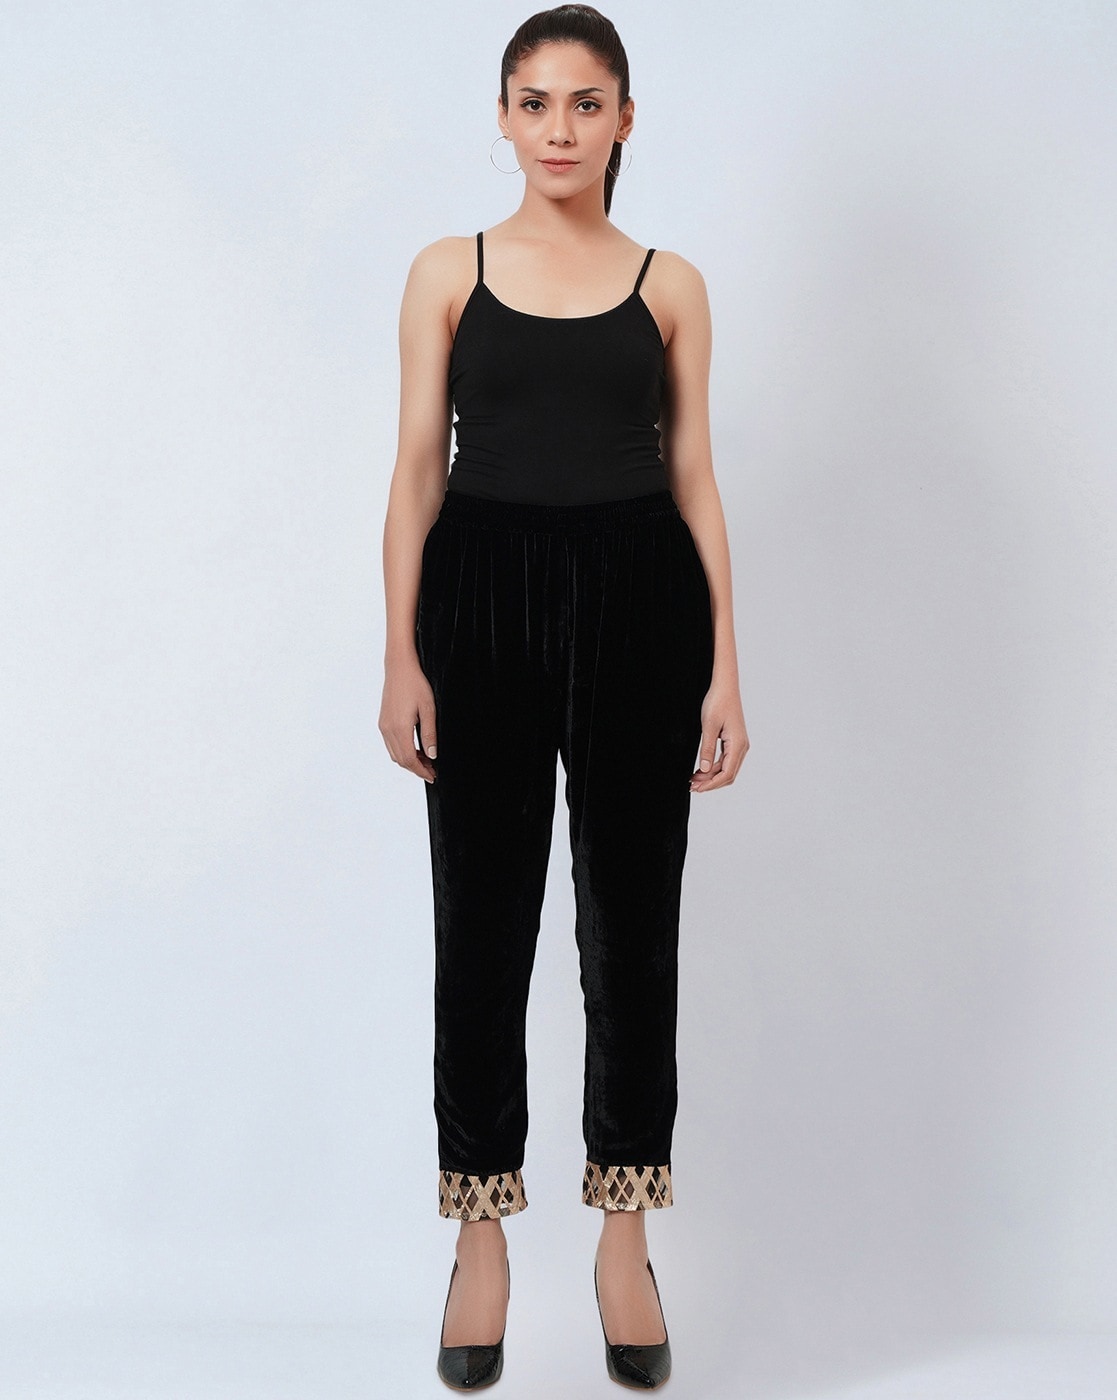 Buy Black Trousers & Pants for Women by First Resort - Ramola Bachchan  Online